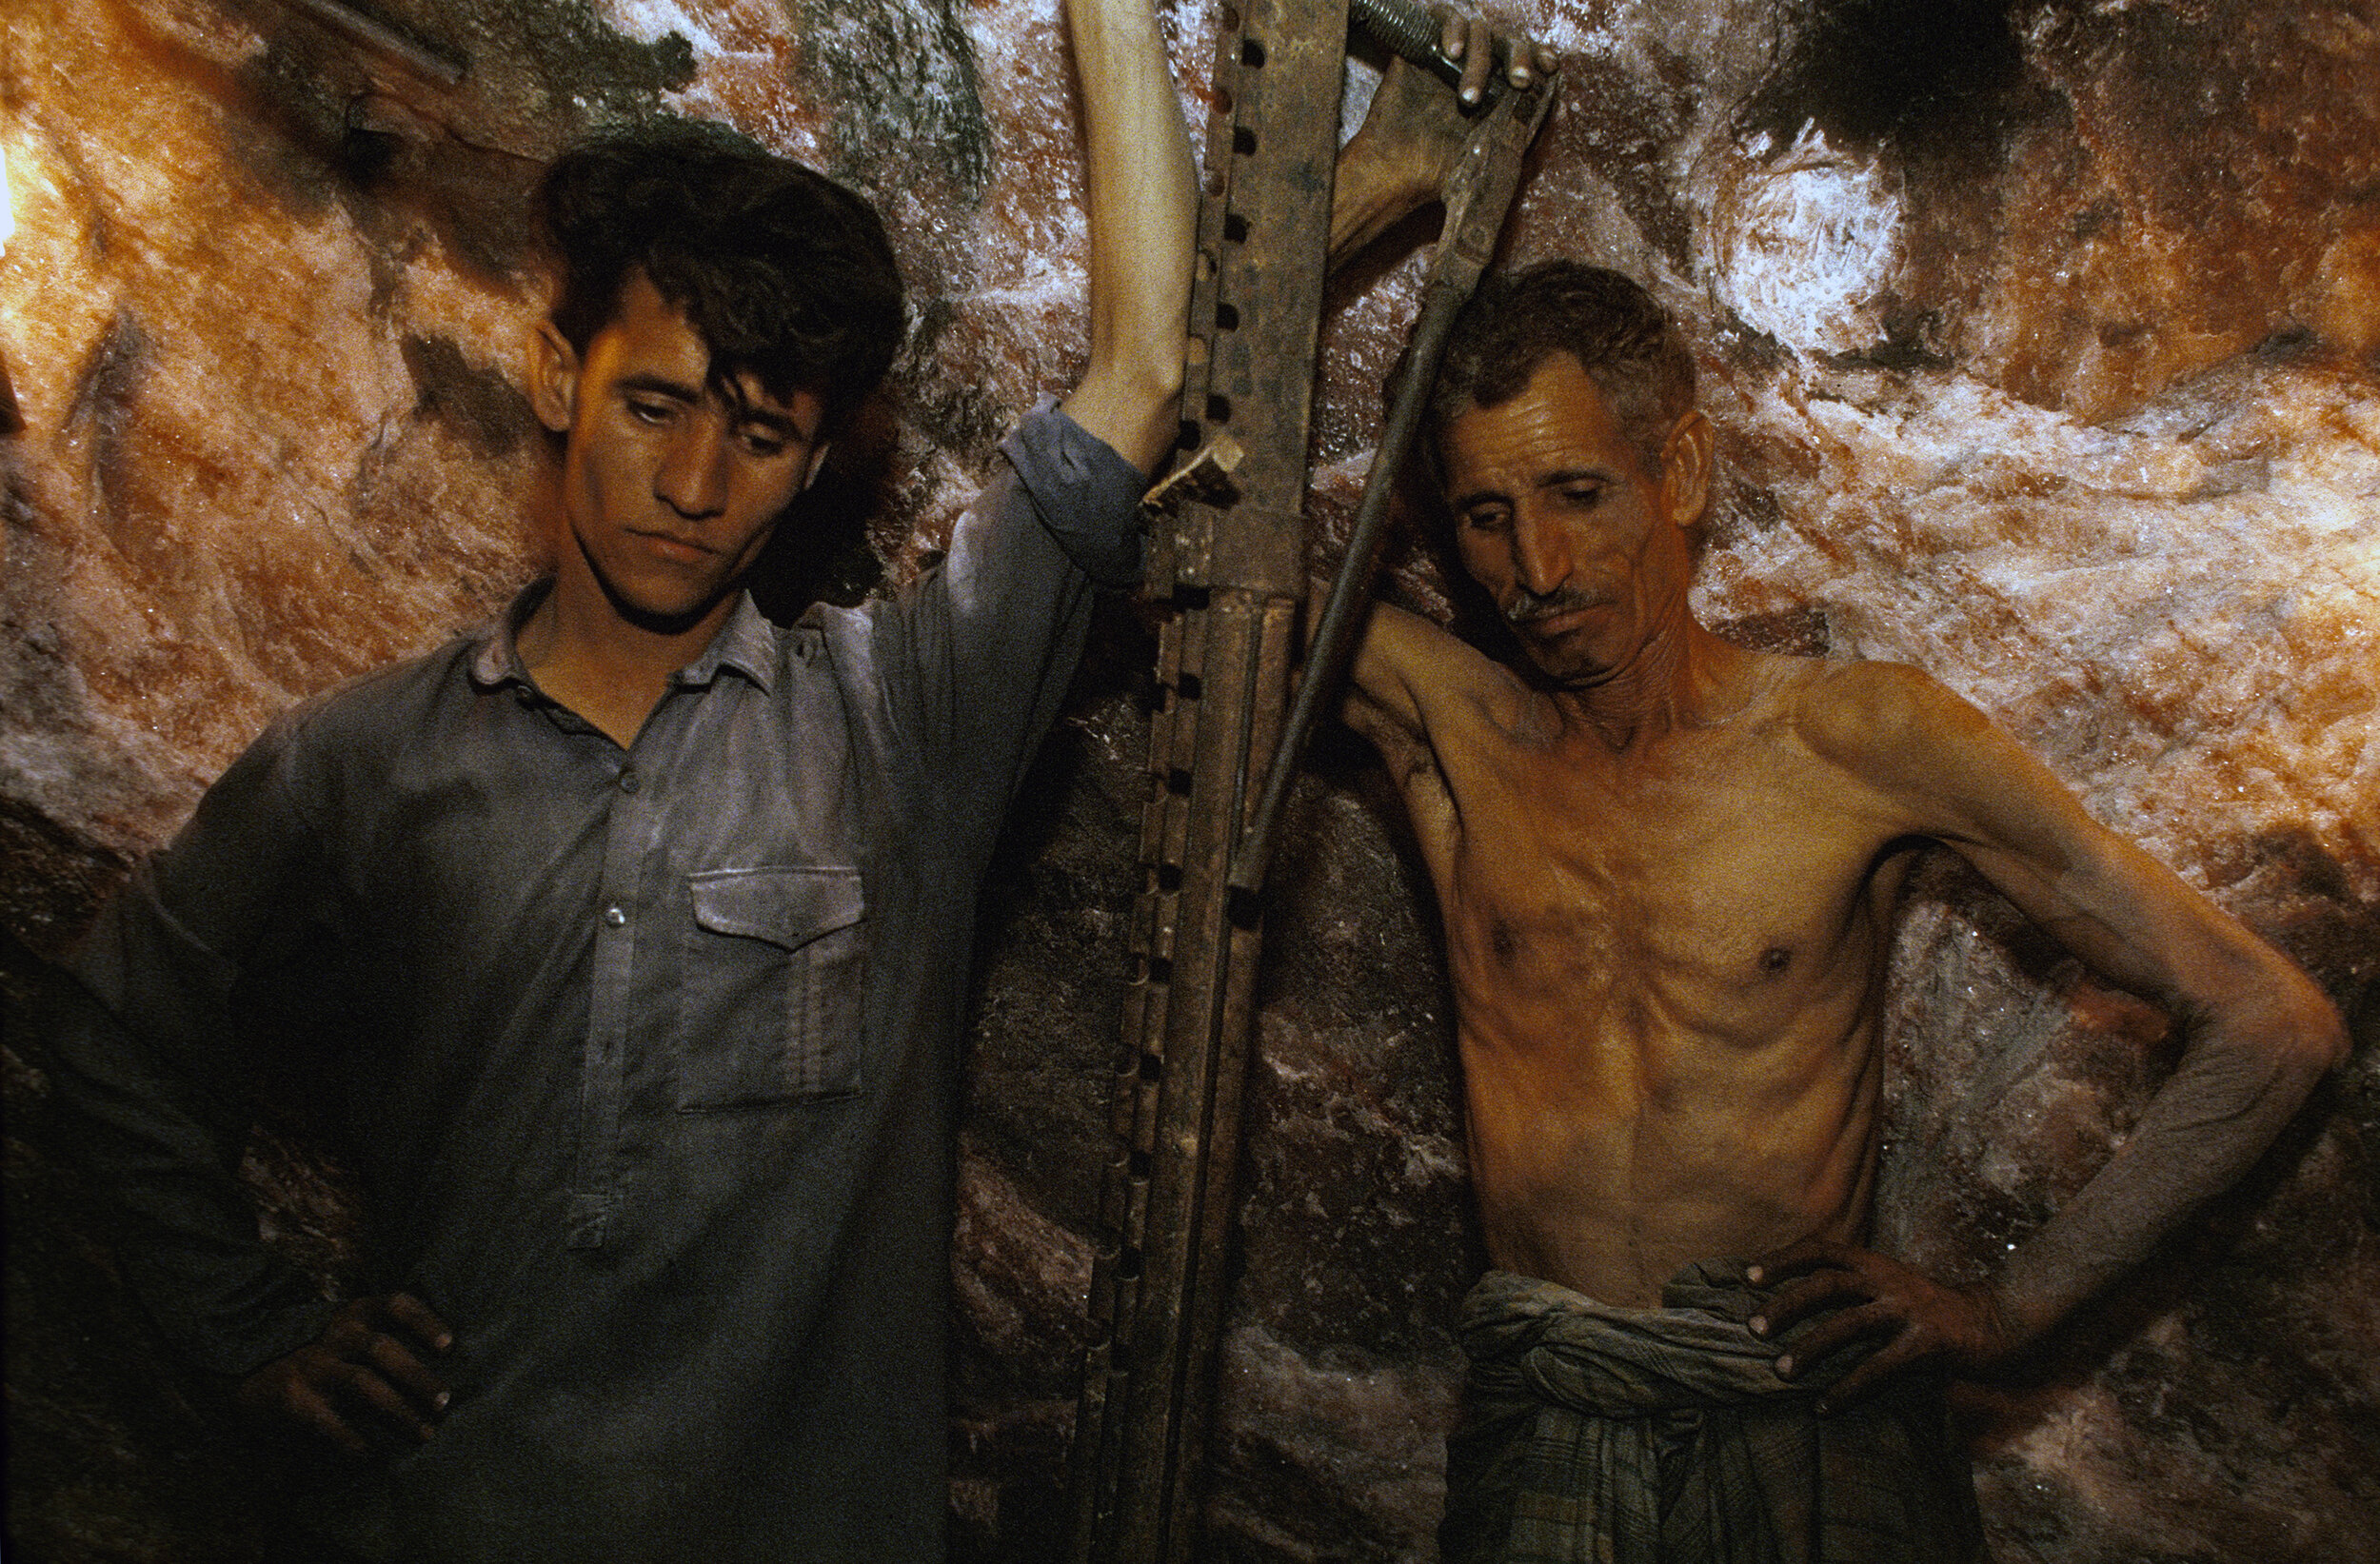  Miners manually drill holes in the Khewra Salt Mines, the oldest in the salt mining history of the sub-continent, one of the largest in Asia and the second largest in the world. Punjab, Pakistan. 1998 